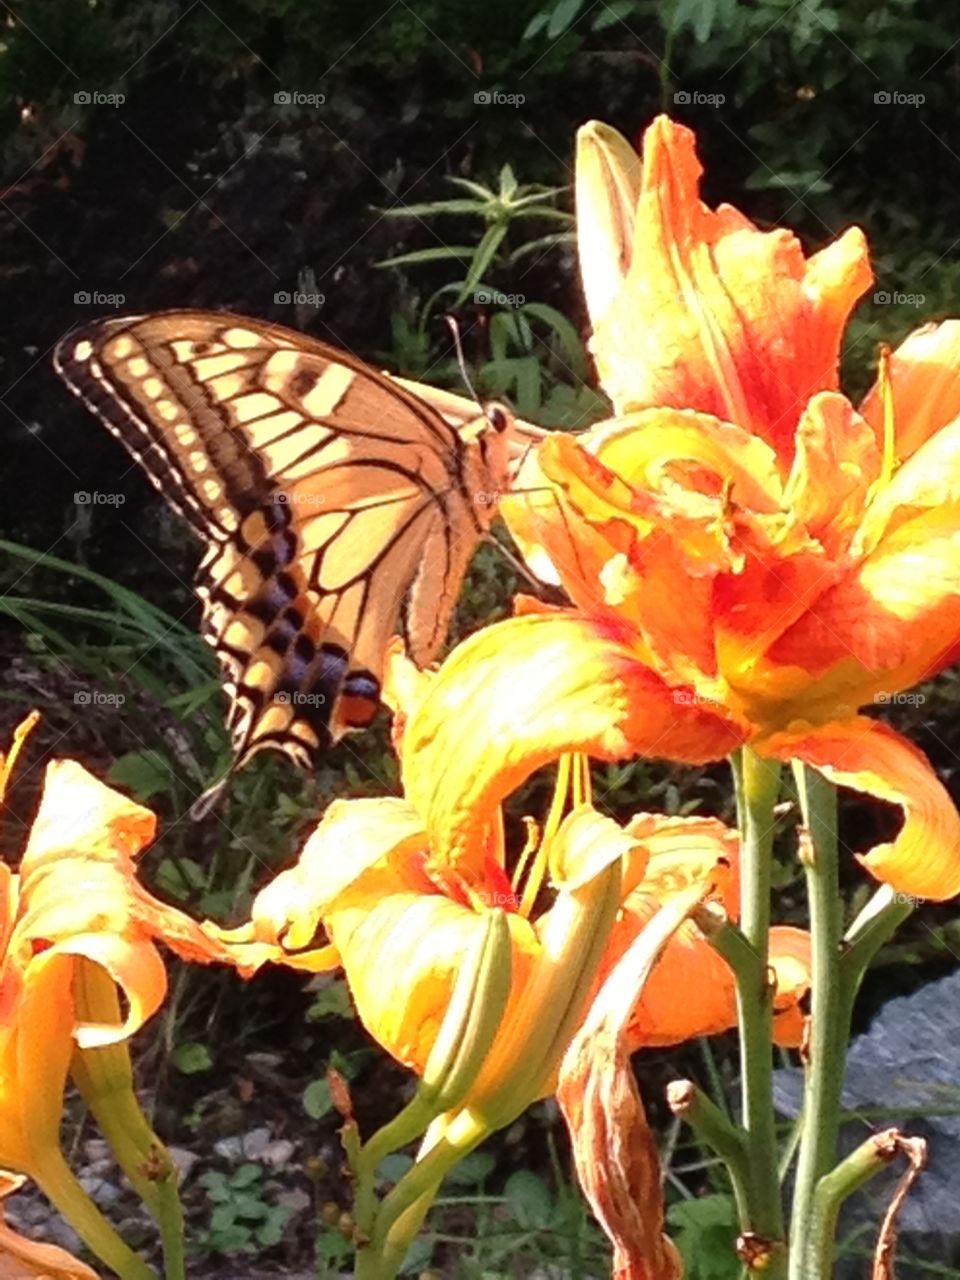 Tiger lily and a swallowtail